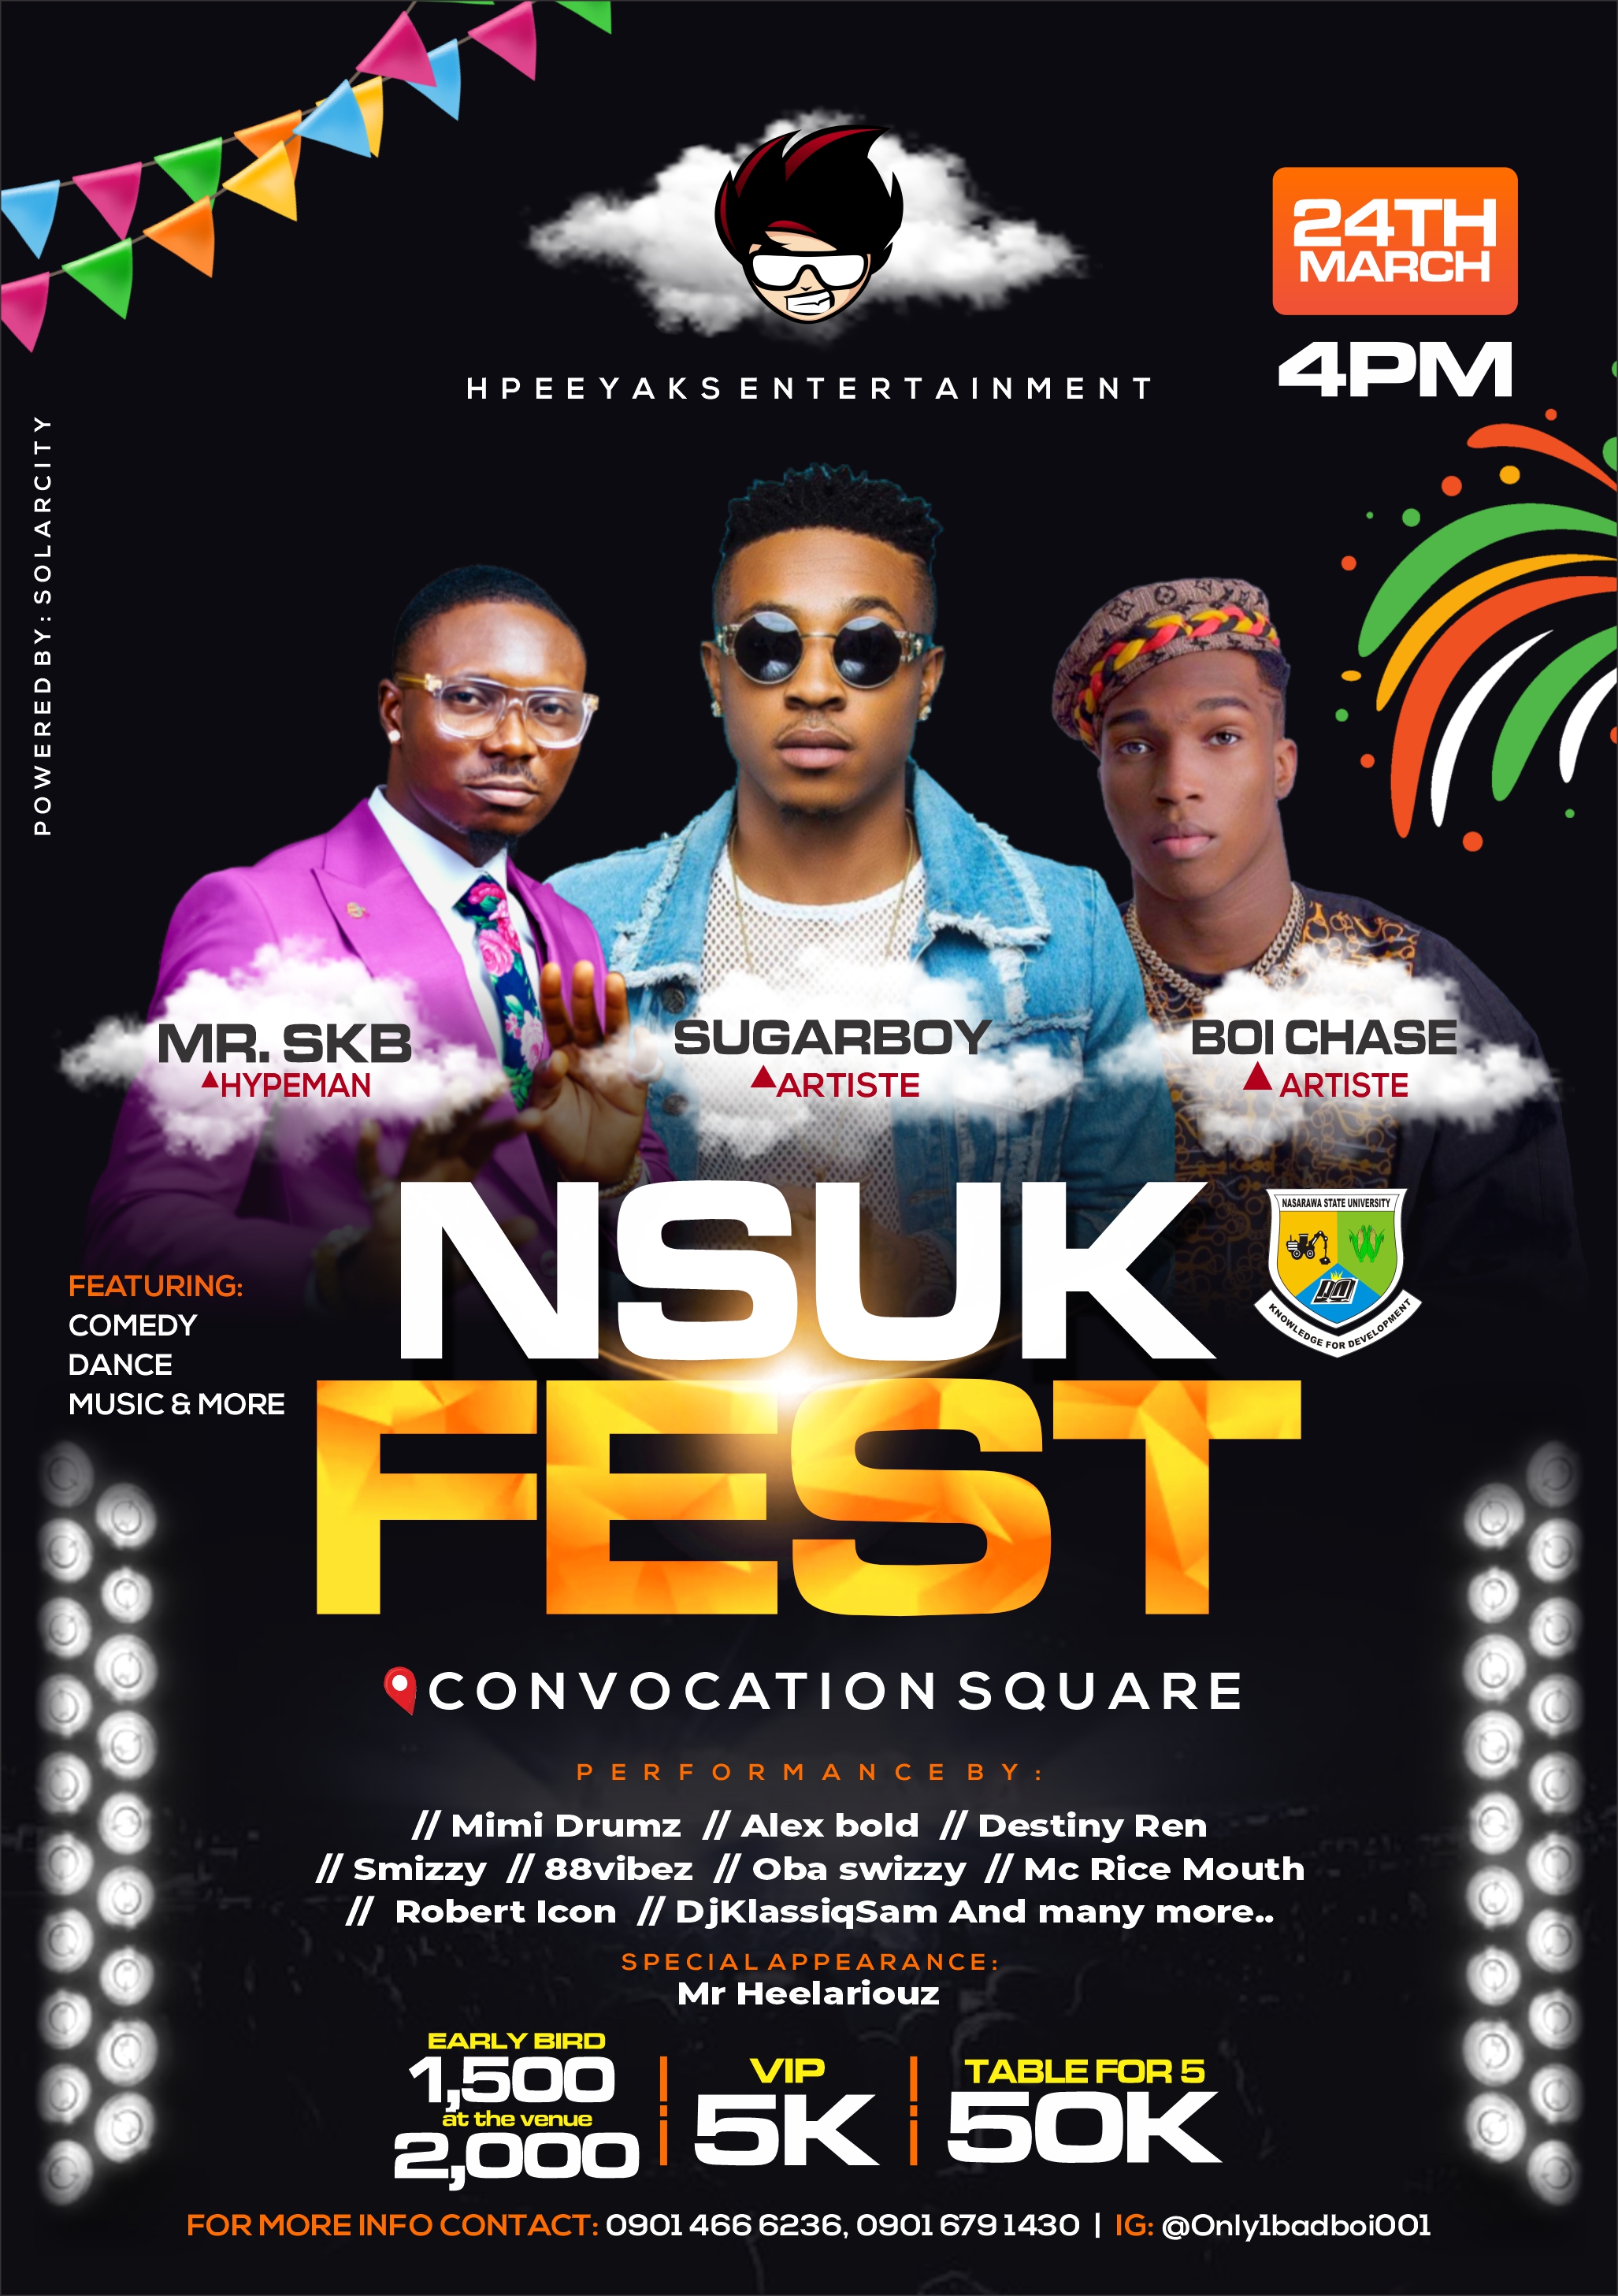 NSUK FEST Post free event in Nigeria using tickethub.ng, buy and sell tickets to event